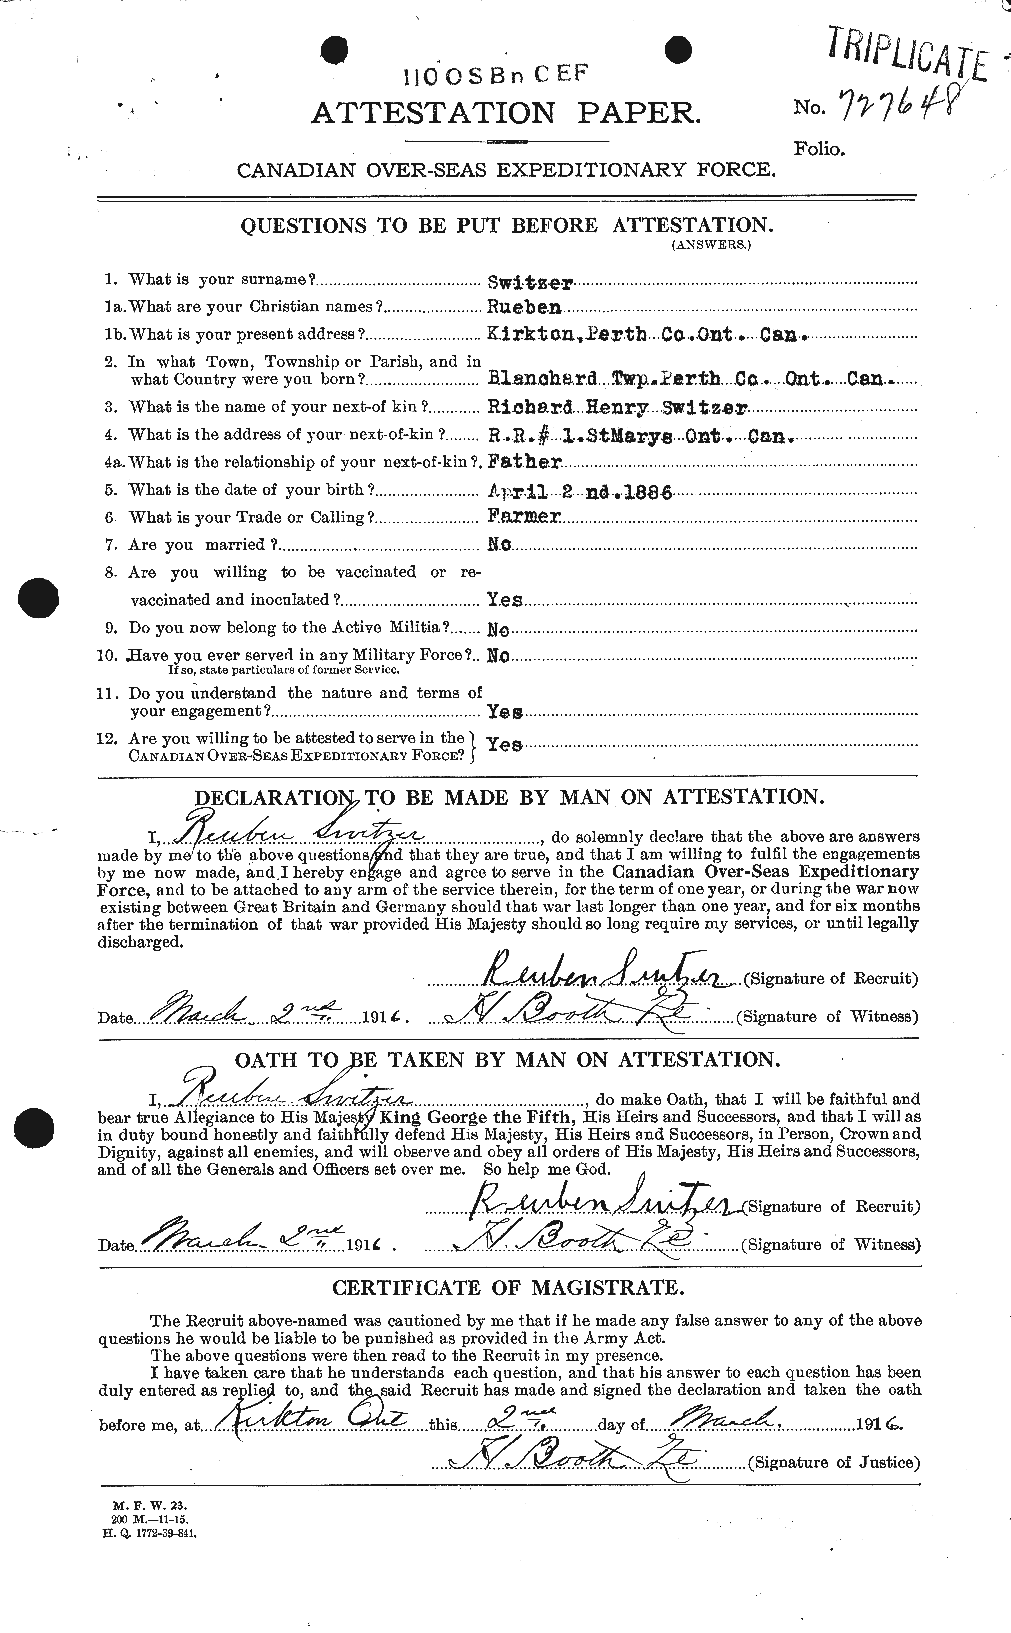 Personnel Records of the First World War - CEF 126777a